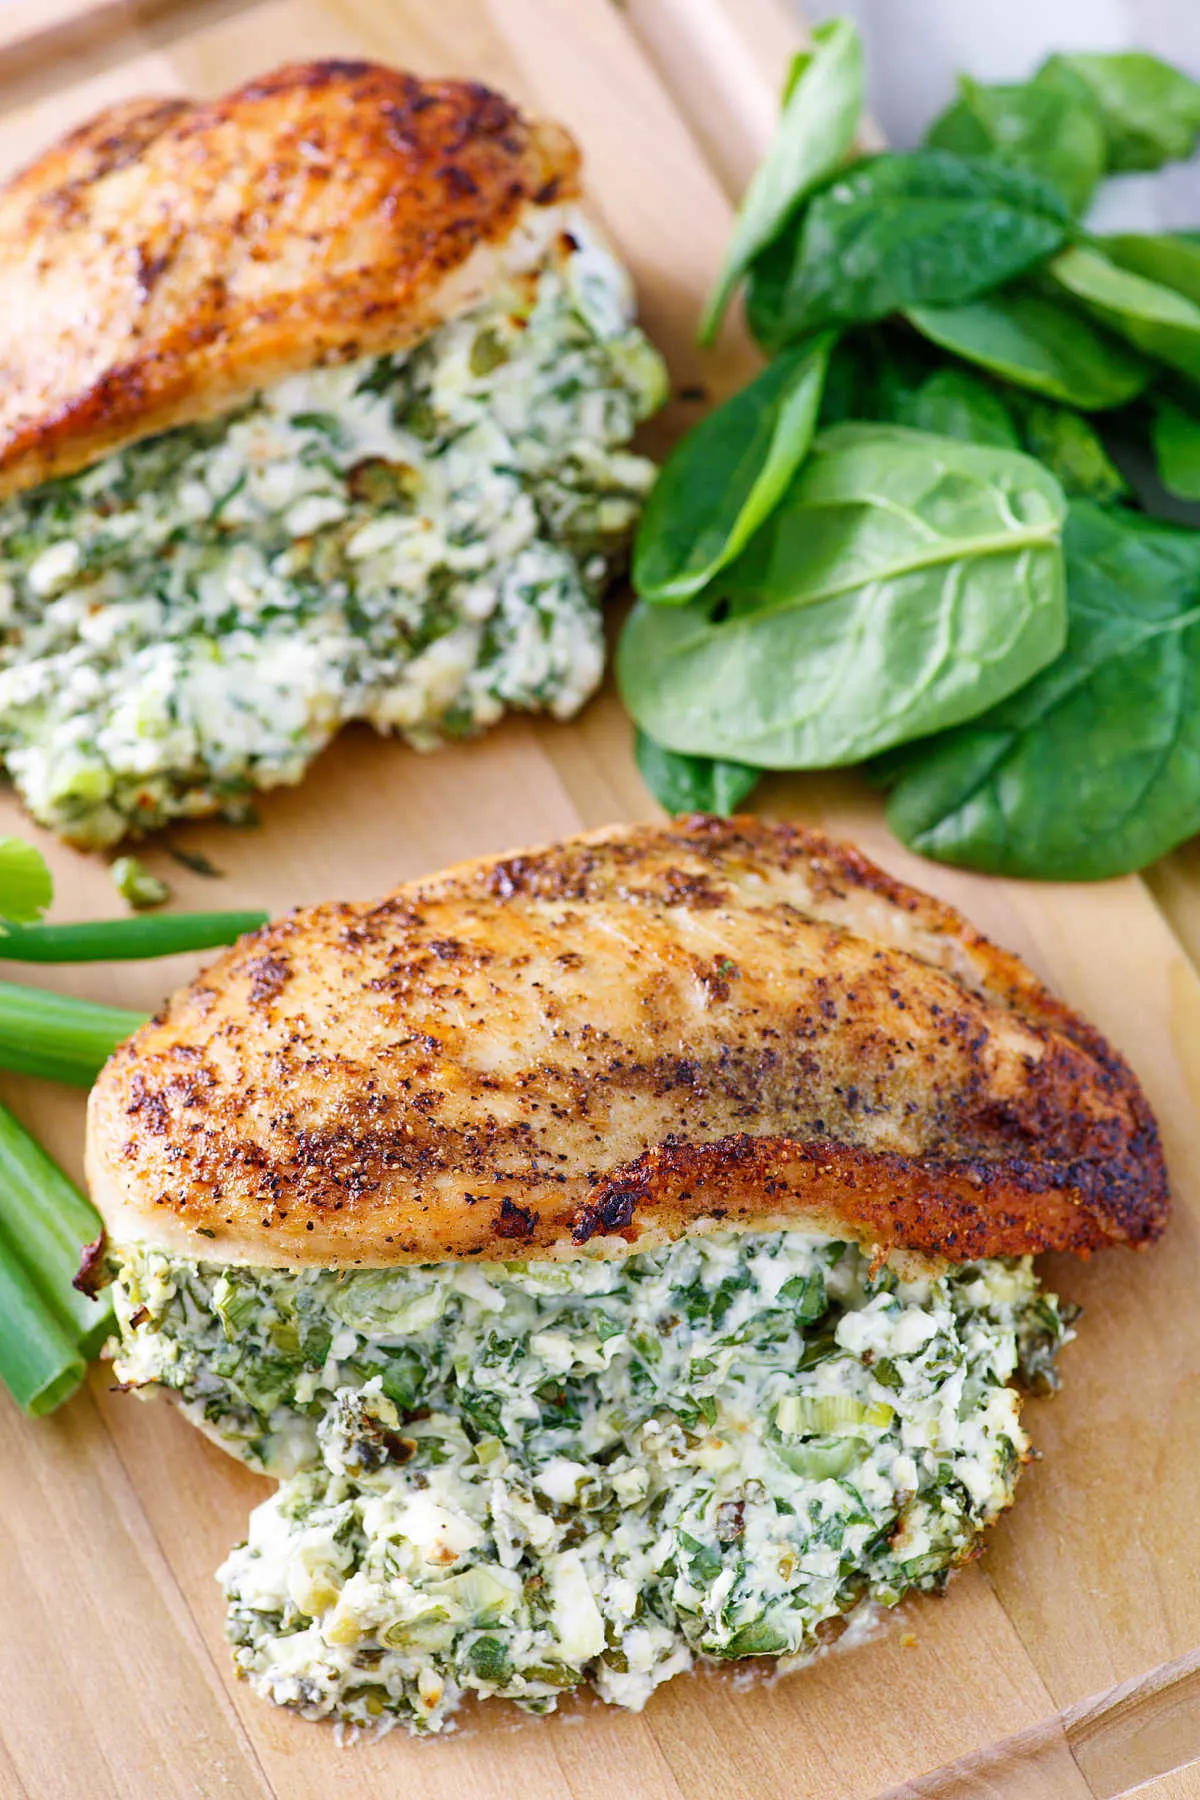 chicken breasts cooked to golden brown and stuffed full of cheese and spinach filling.